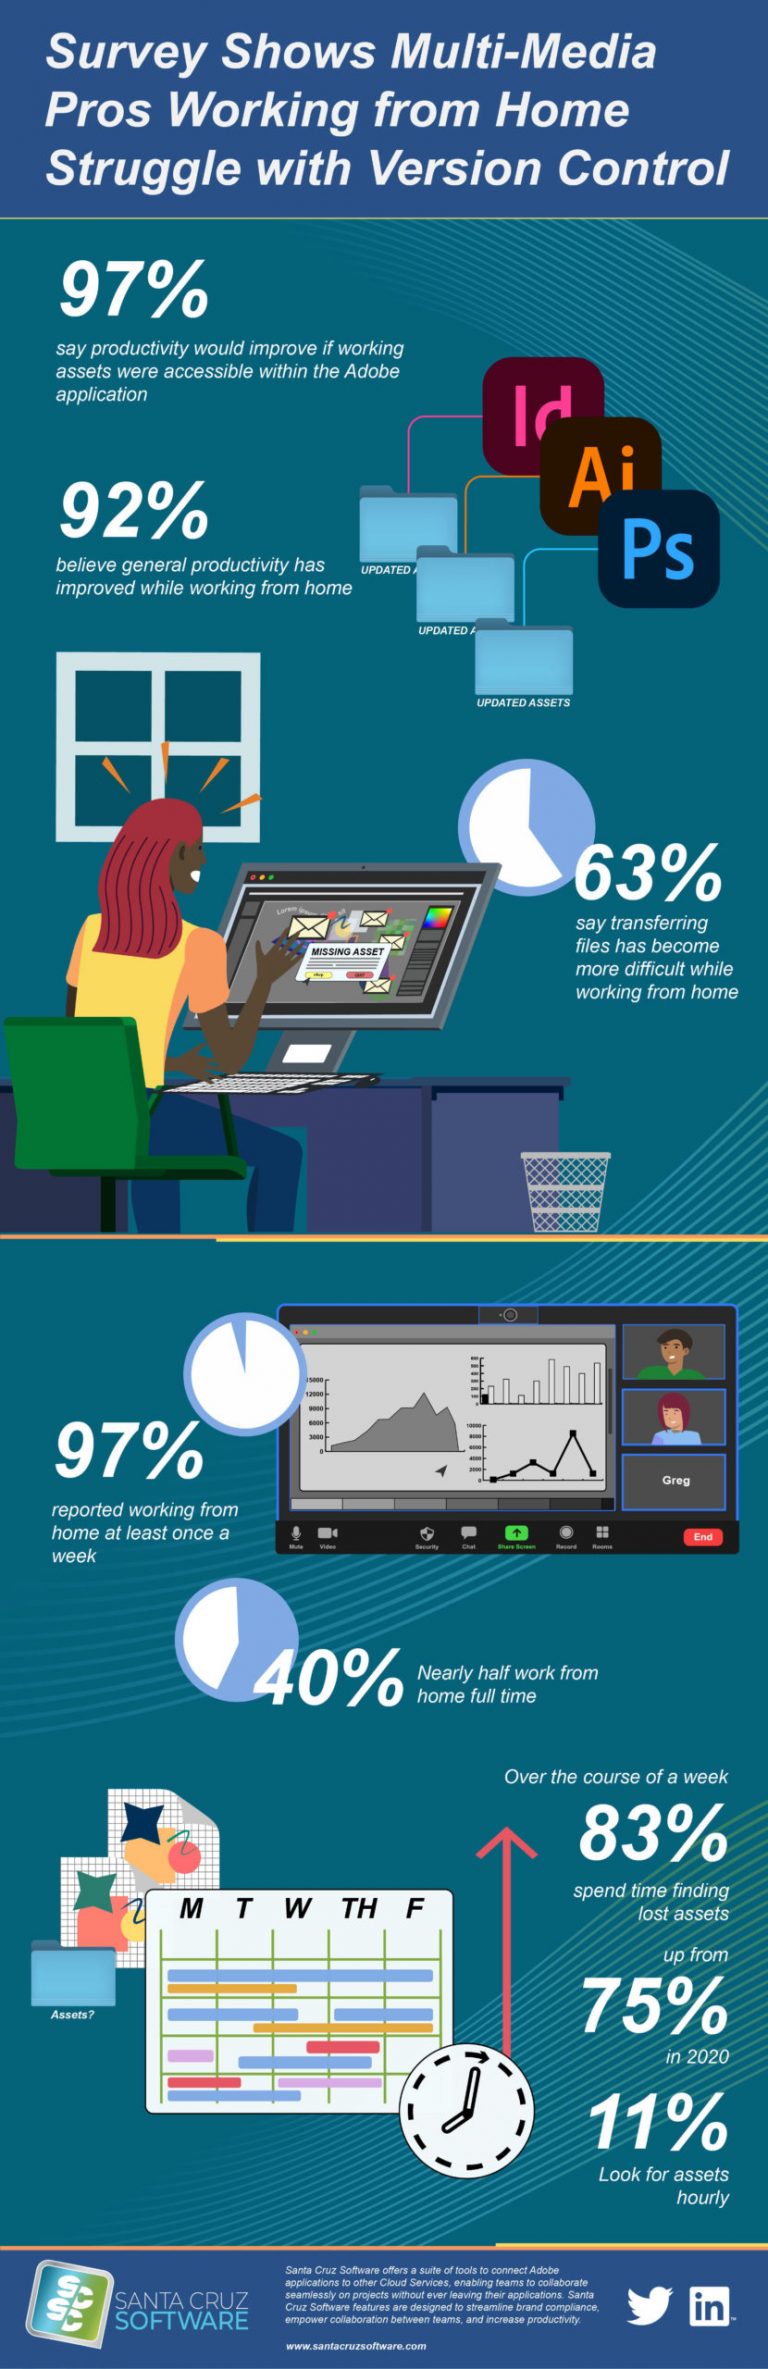 Infographic - Survey Shows Multi-Media Pros Working from Home Struggle with Version Control